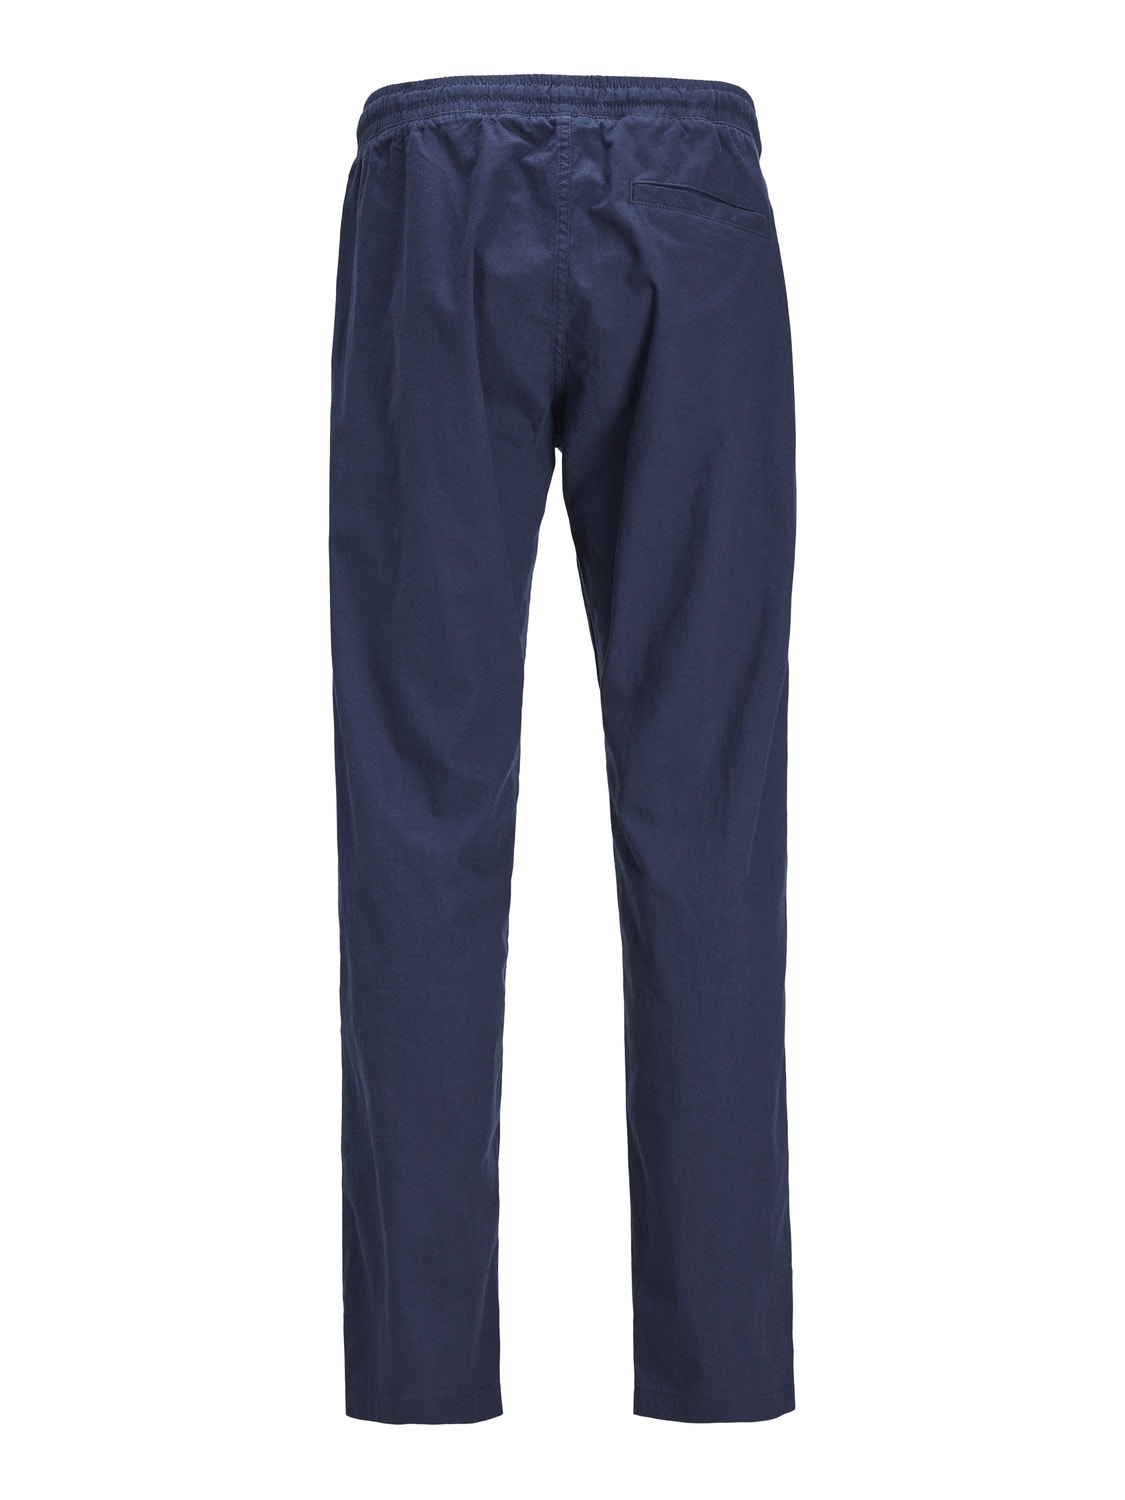 Jack & Jones Relaxed Fit Classic trousers -Navy Blazer - 12248606